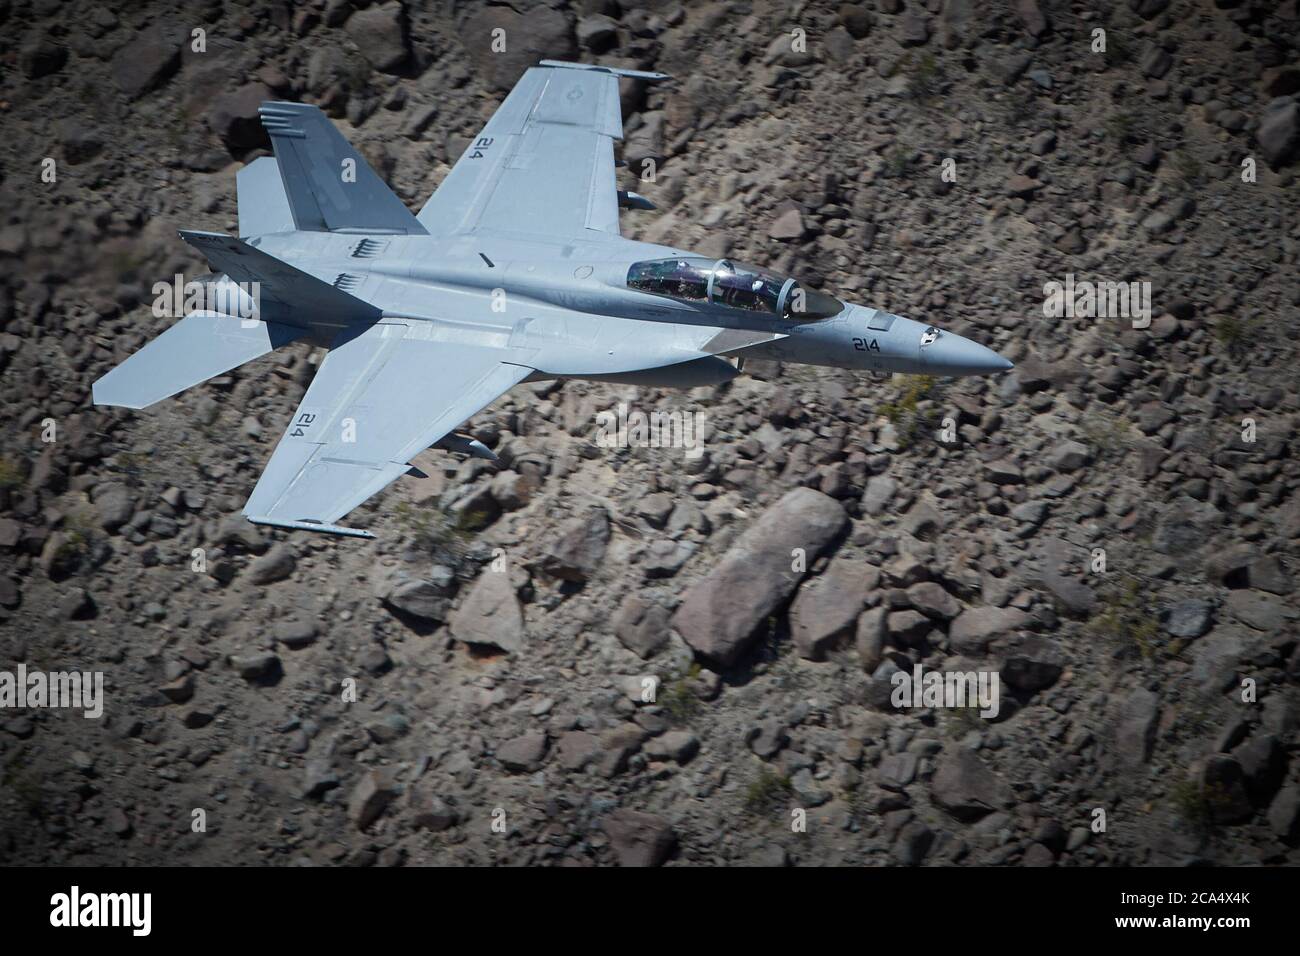 United States Navy F/A-18F Super Hornet Jet Fighter, Flying At Low Level And High Speed Along Rainbow Canyon, California, USA. Stock Photo